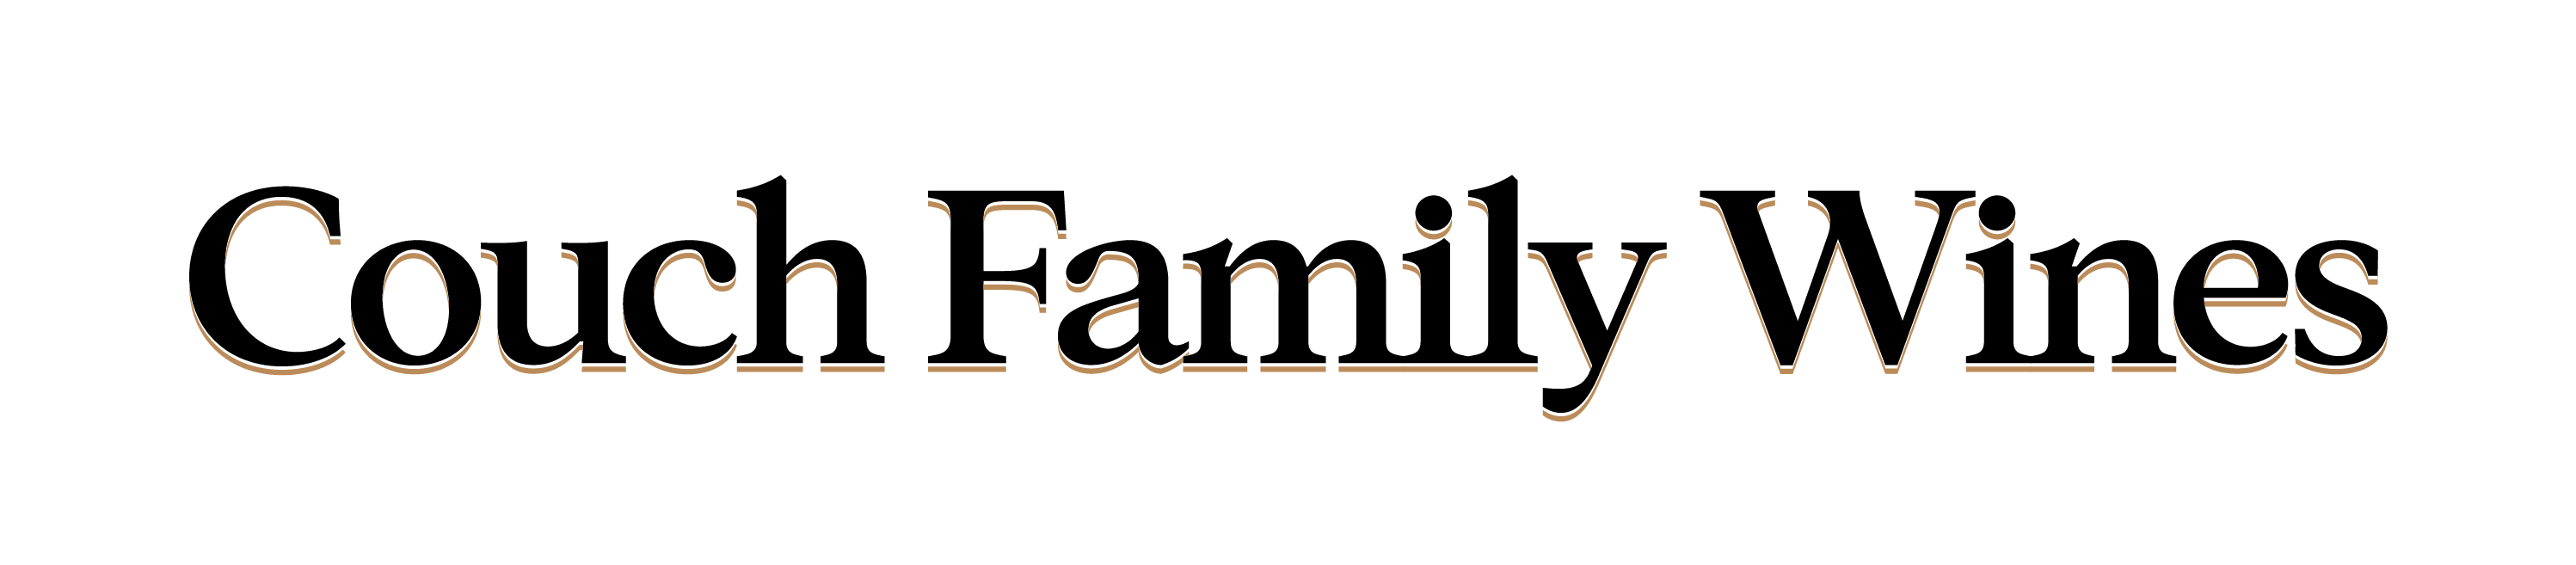 Couch Family Wines Wordmark